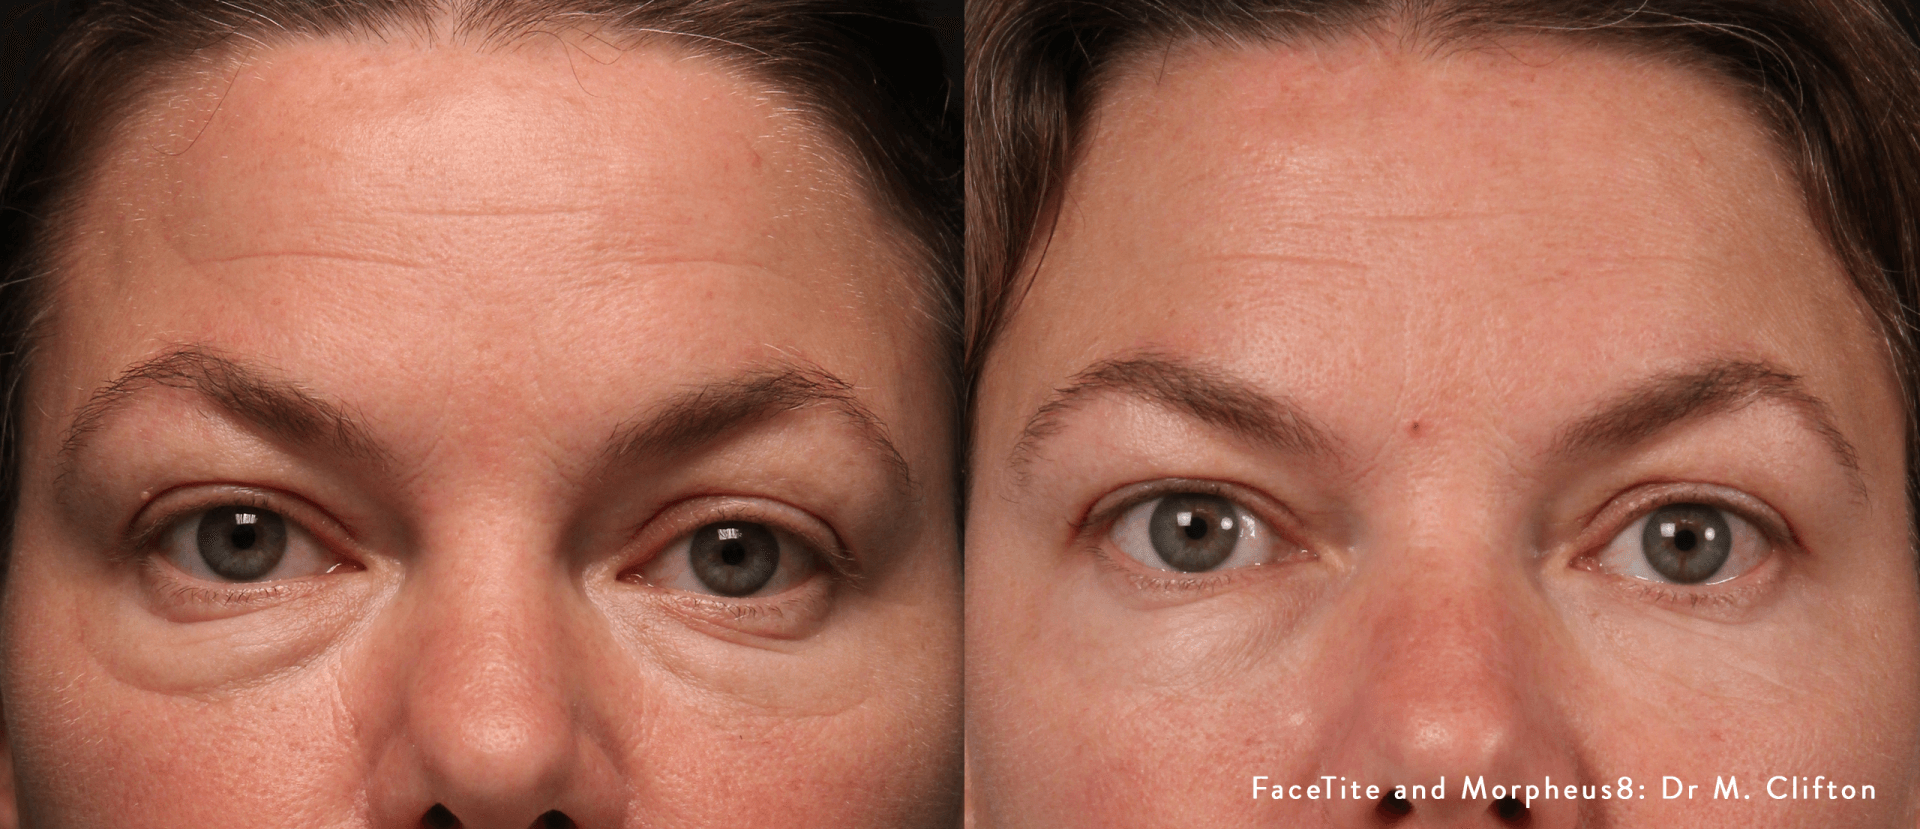 Facetite - Before & After